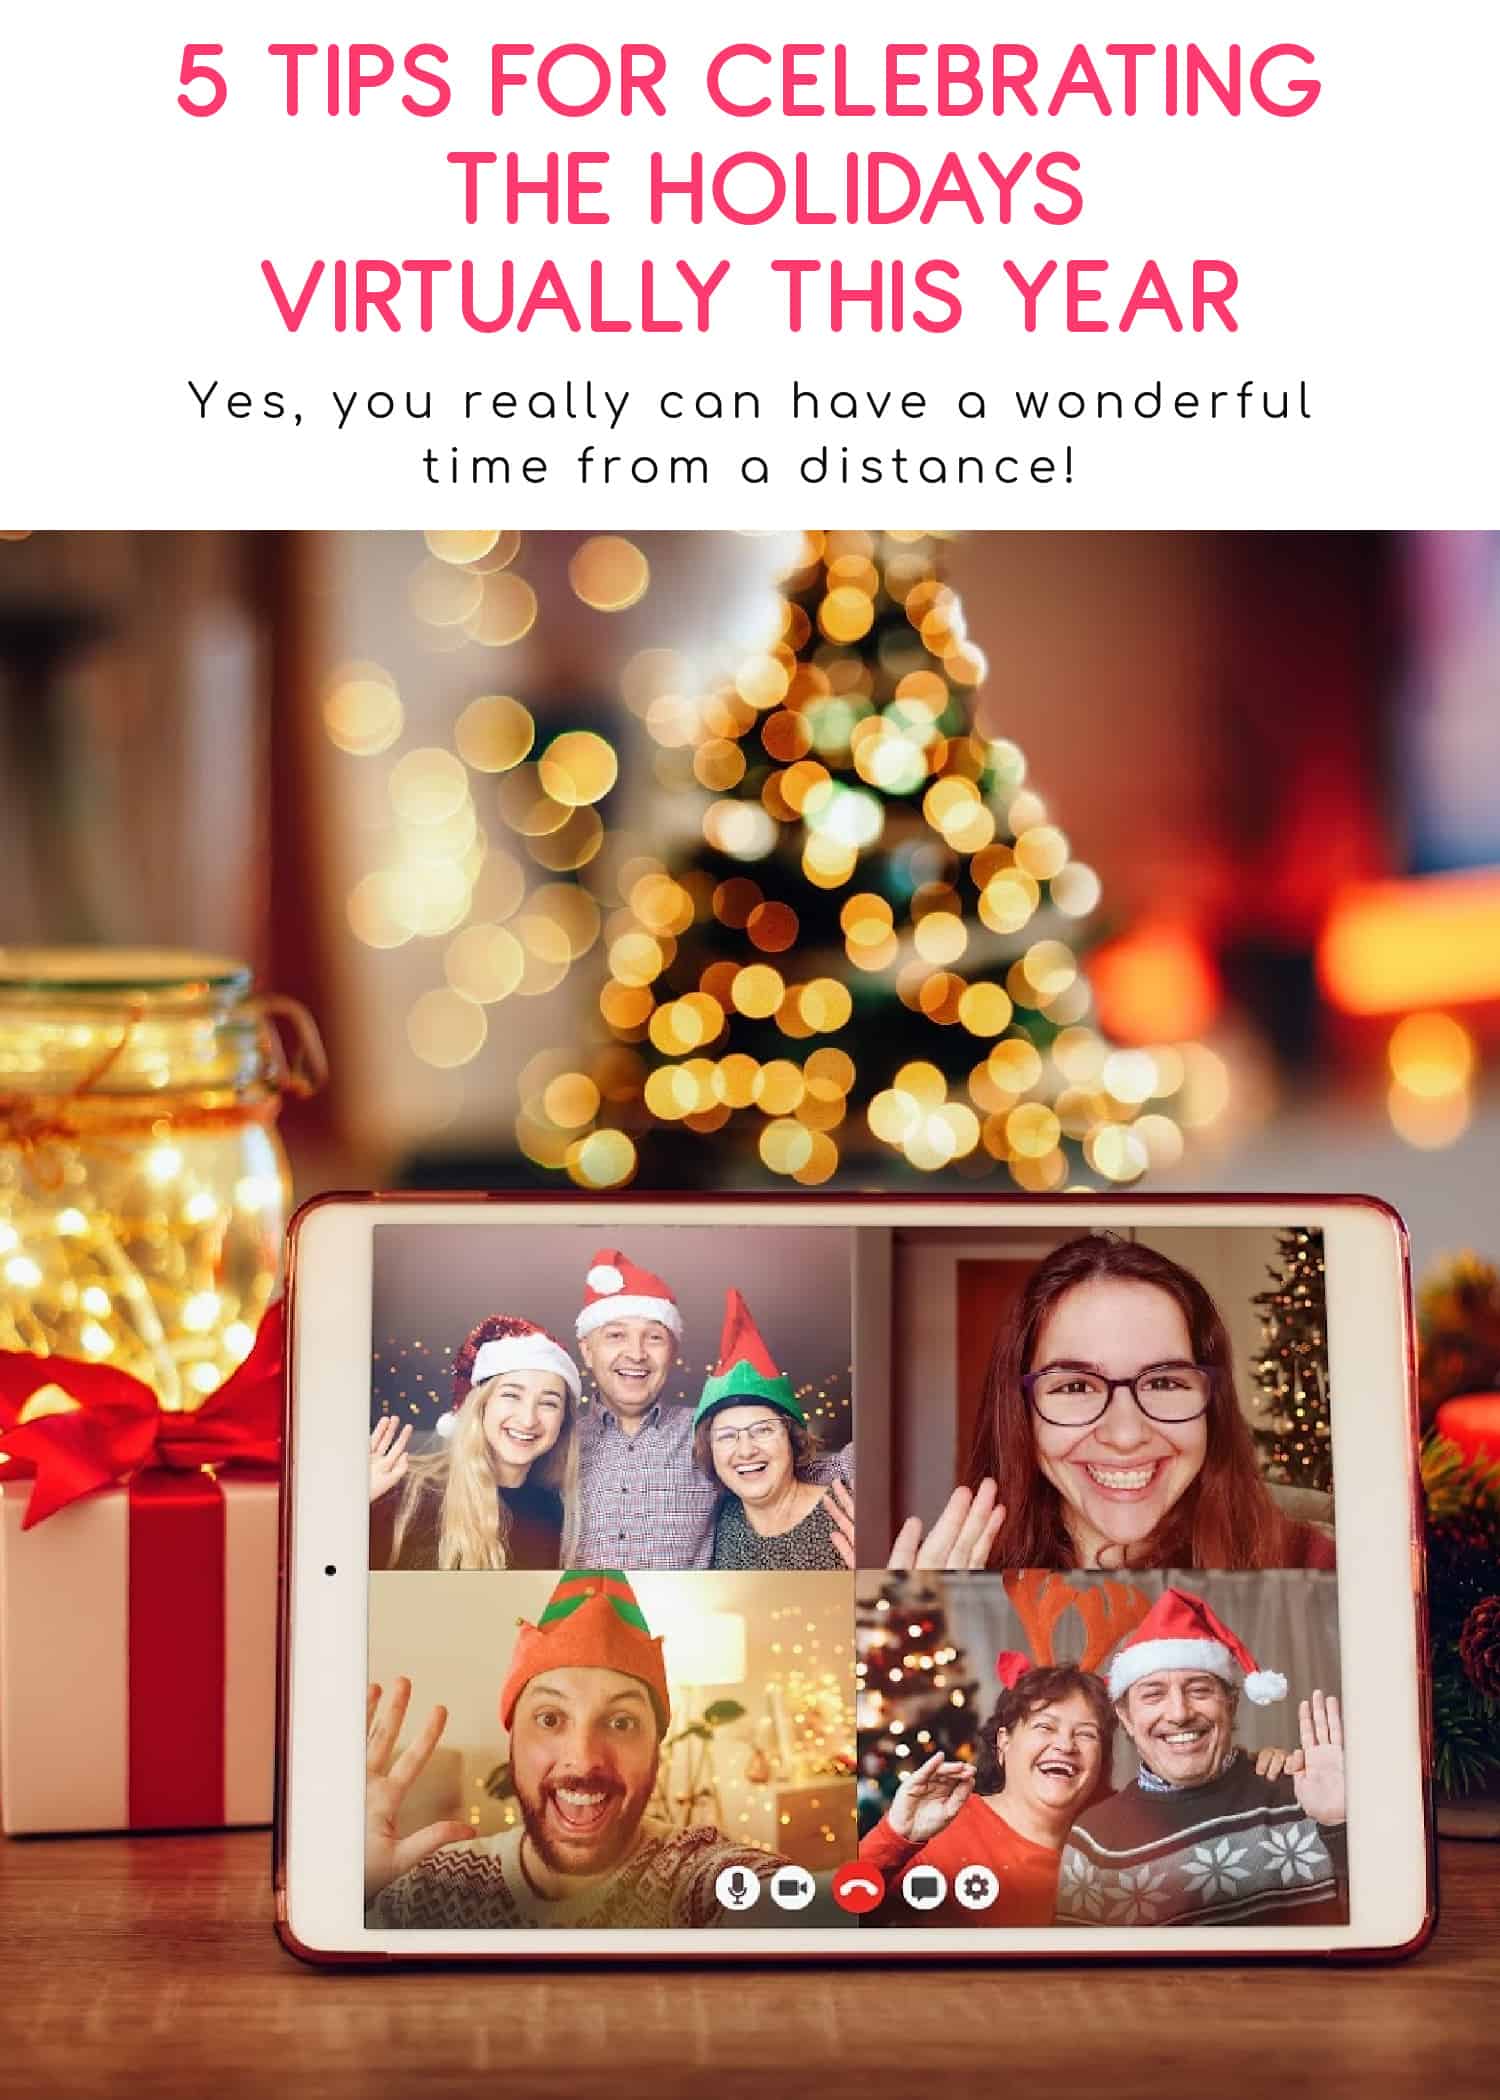 Think Christmas is cancelled just because you can't get together with family in person? Think again! Check out 5 tips to have an amazing virtual holiday celebration this year.